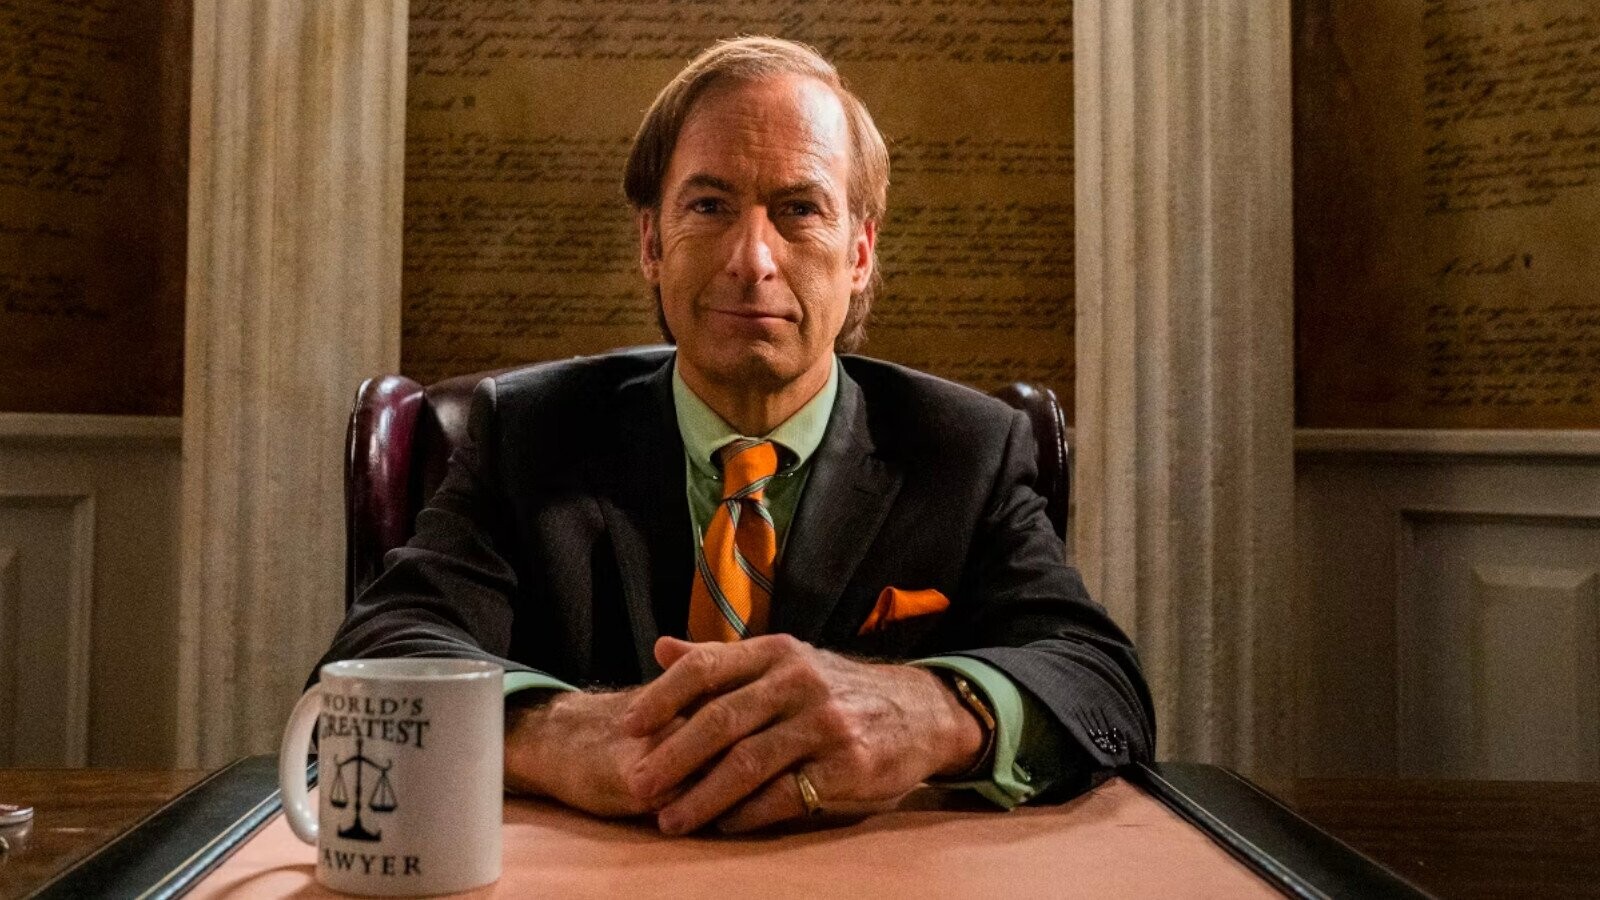 'Better Call Saul' Finally Solved A Long-Running 'Breaking Bad' Mystery